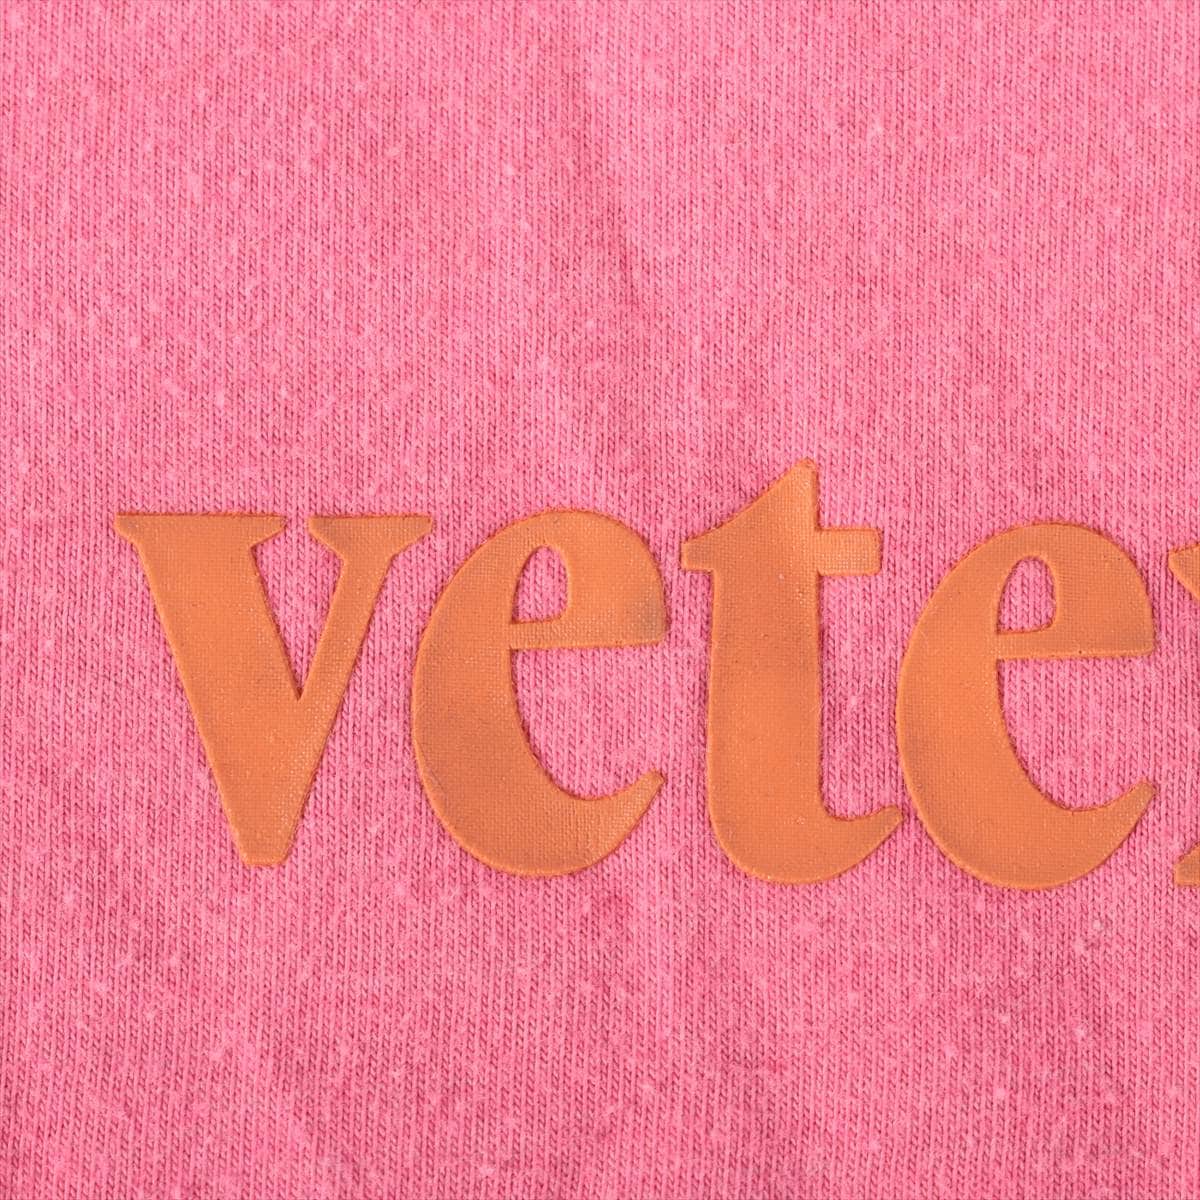 Vetements 20 years Cotton & polyester T-shirt S Unisex Pink  barcode patch logo print